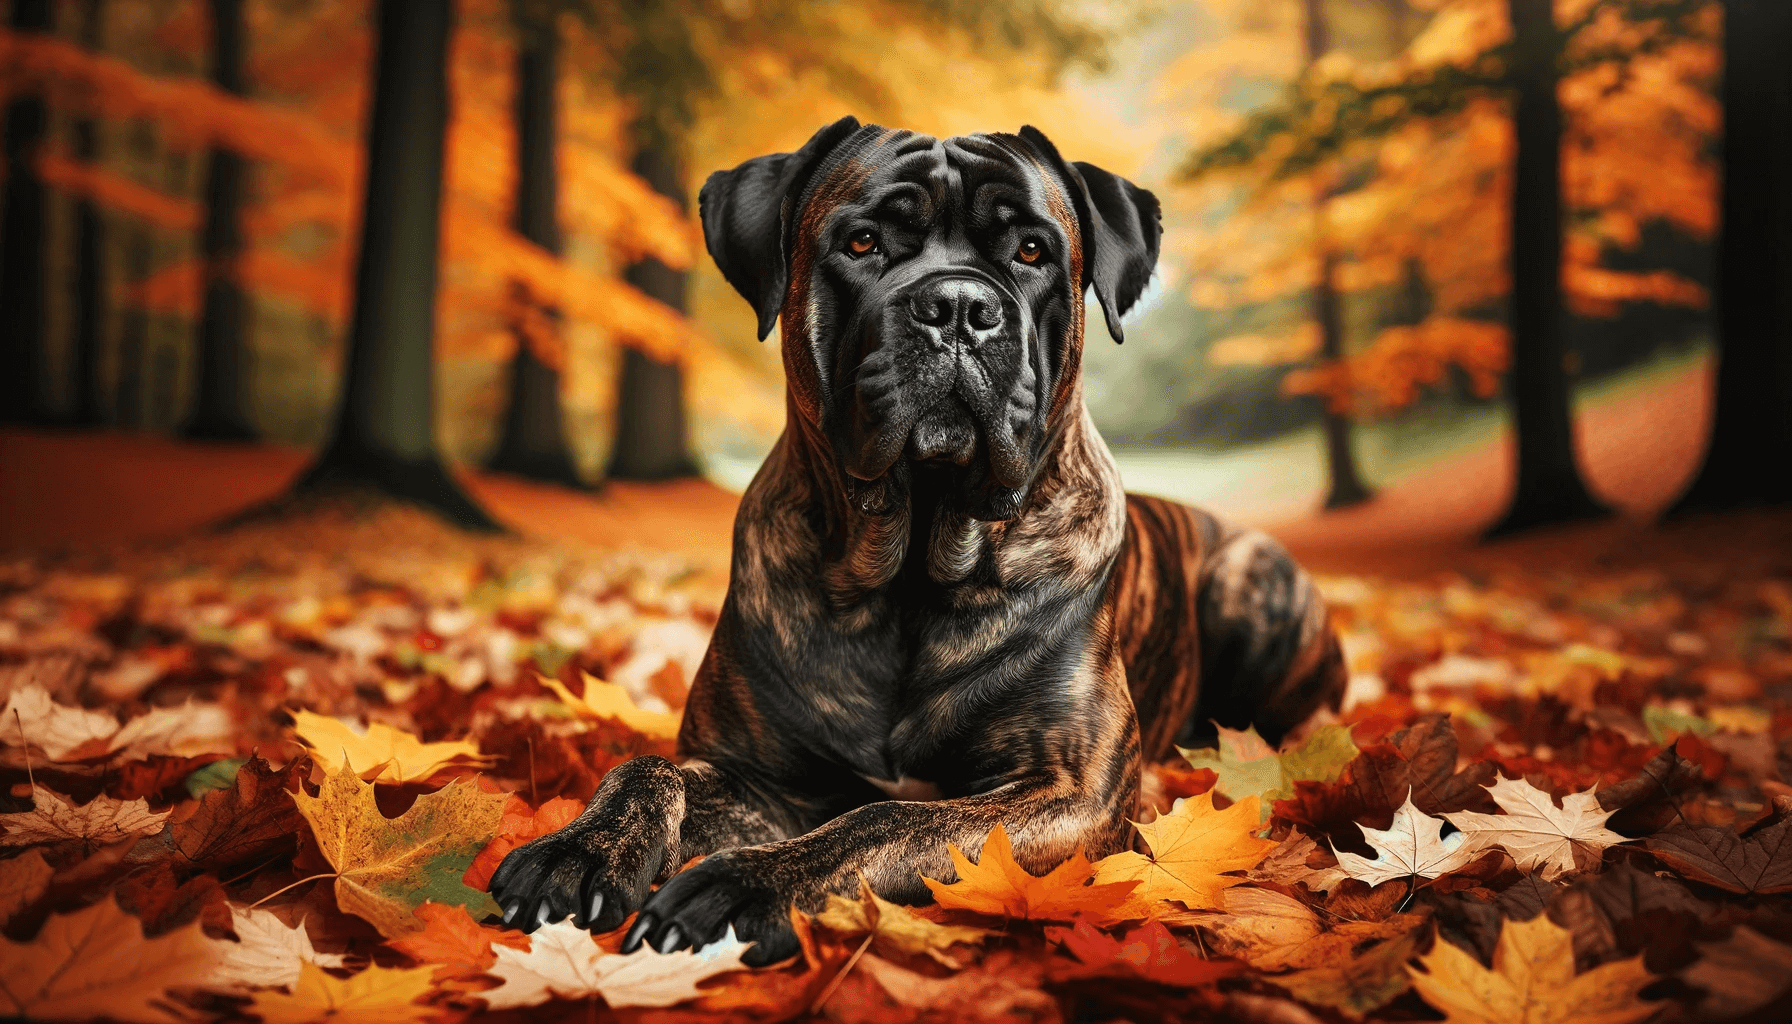 A brindle Cane Corso dog peacefully lying down on a carpet of fallen leaves, embodying the relaxation and beauty of autumn.